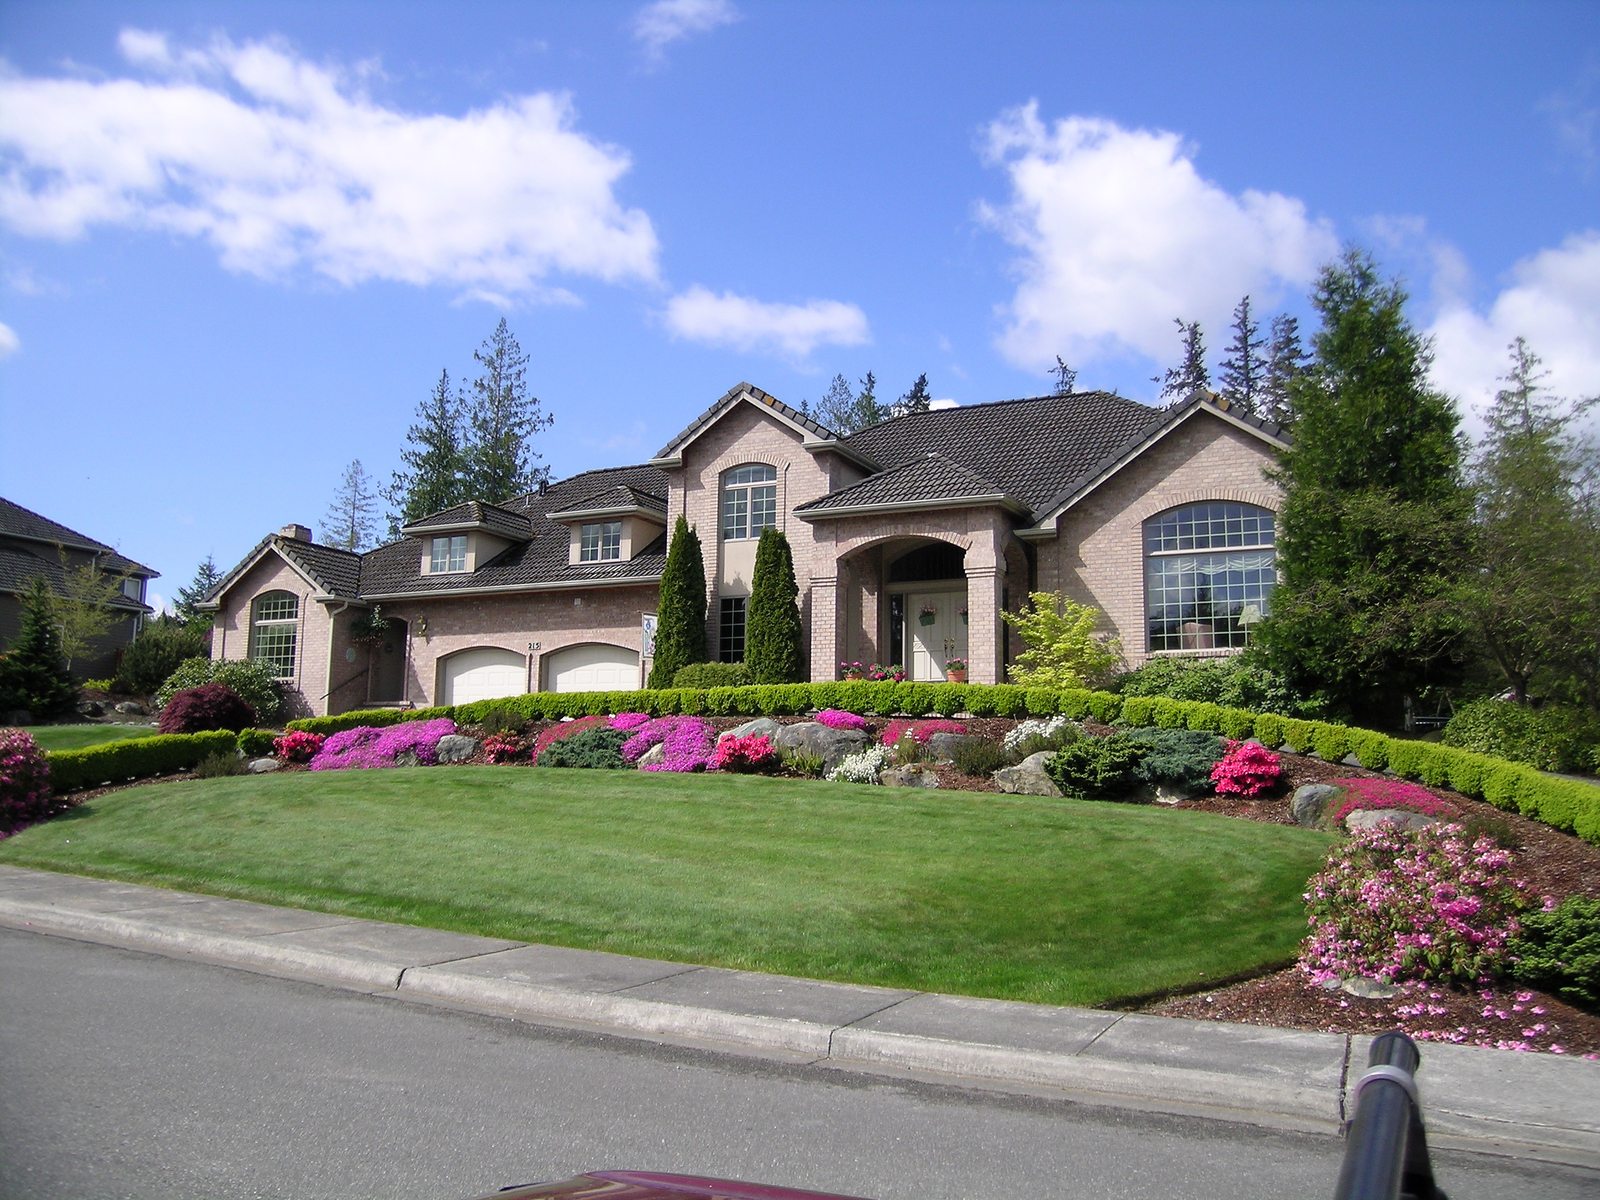 Landscaping Tips From the Pros - Charlotte Home Sales